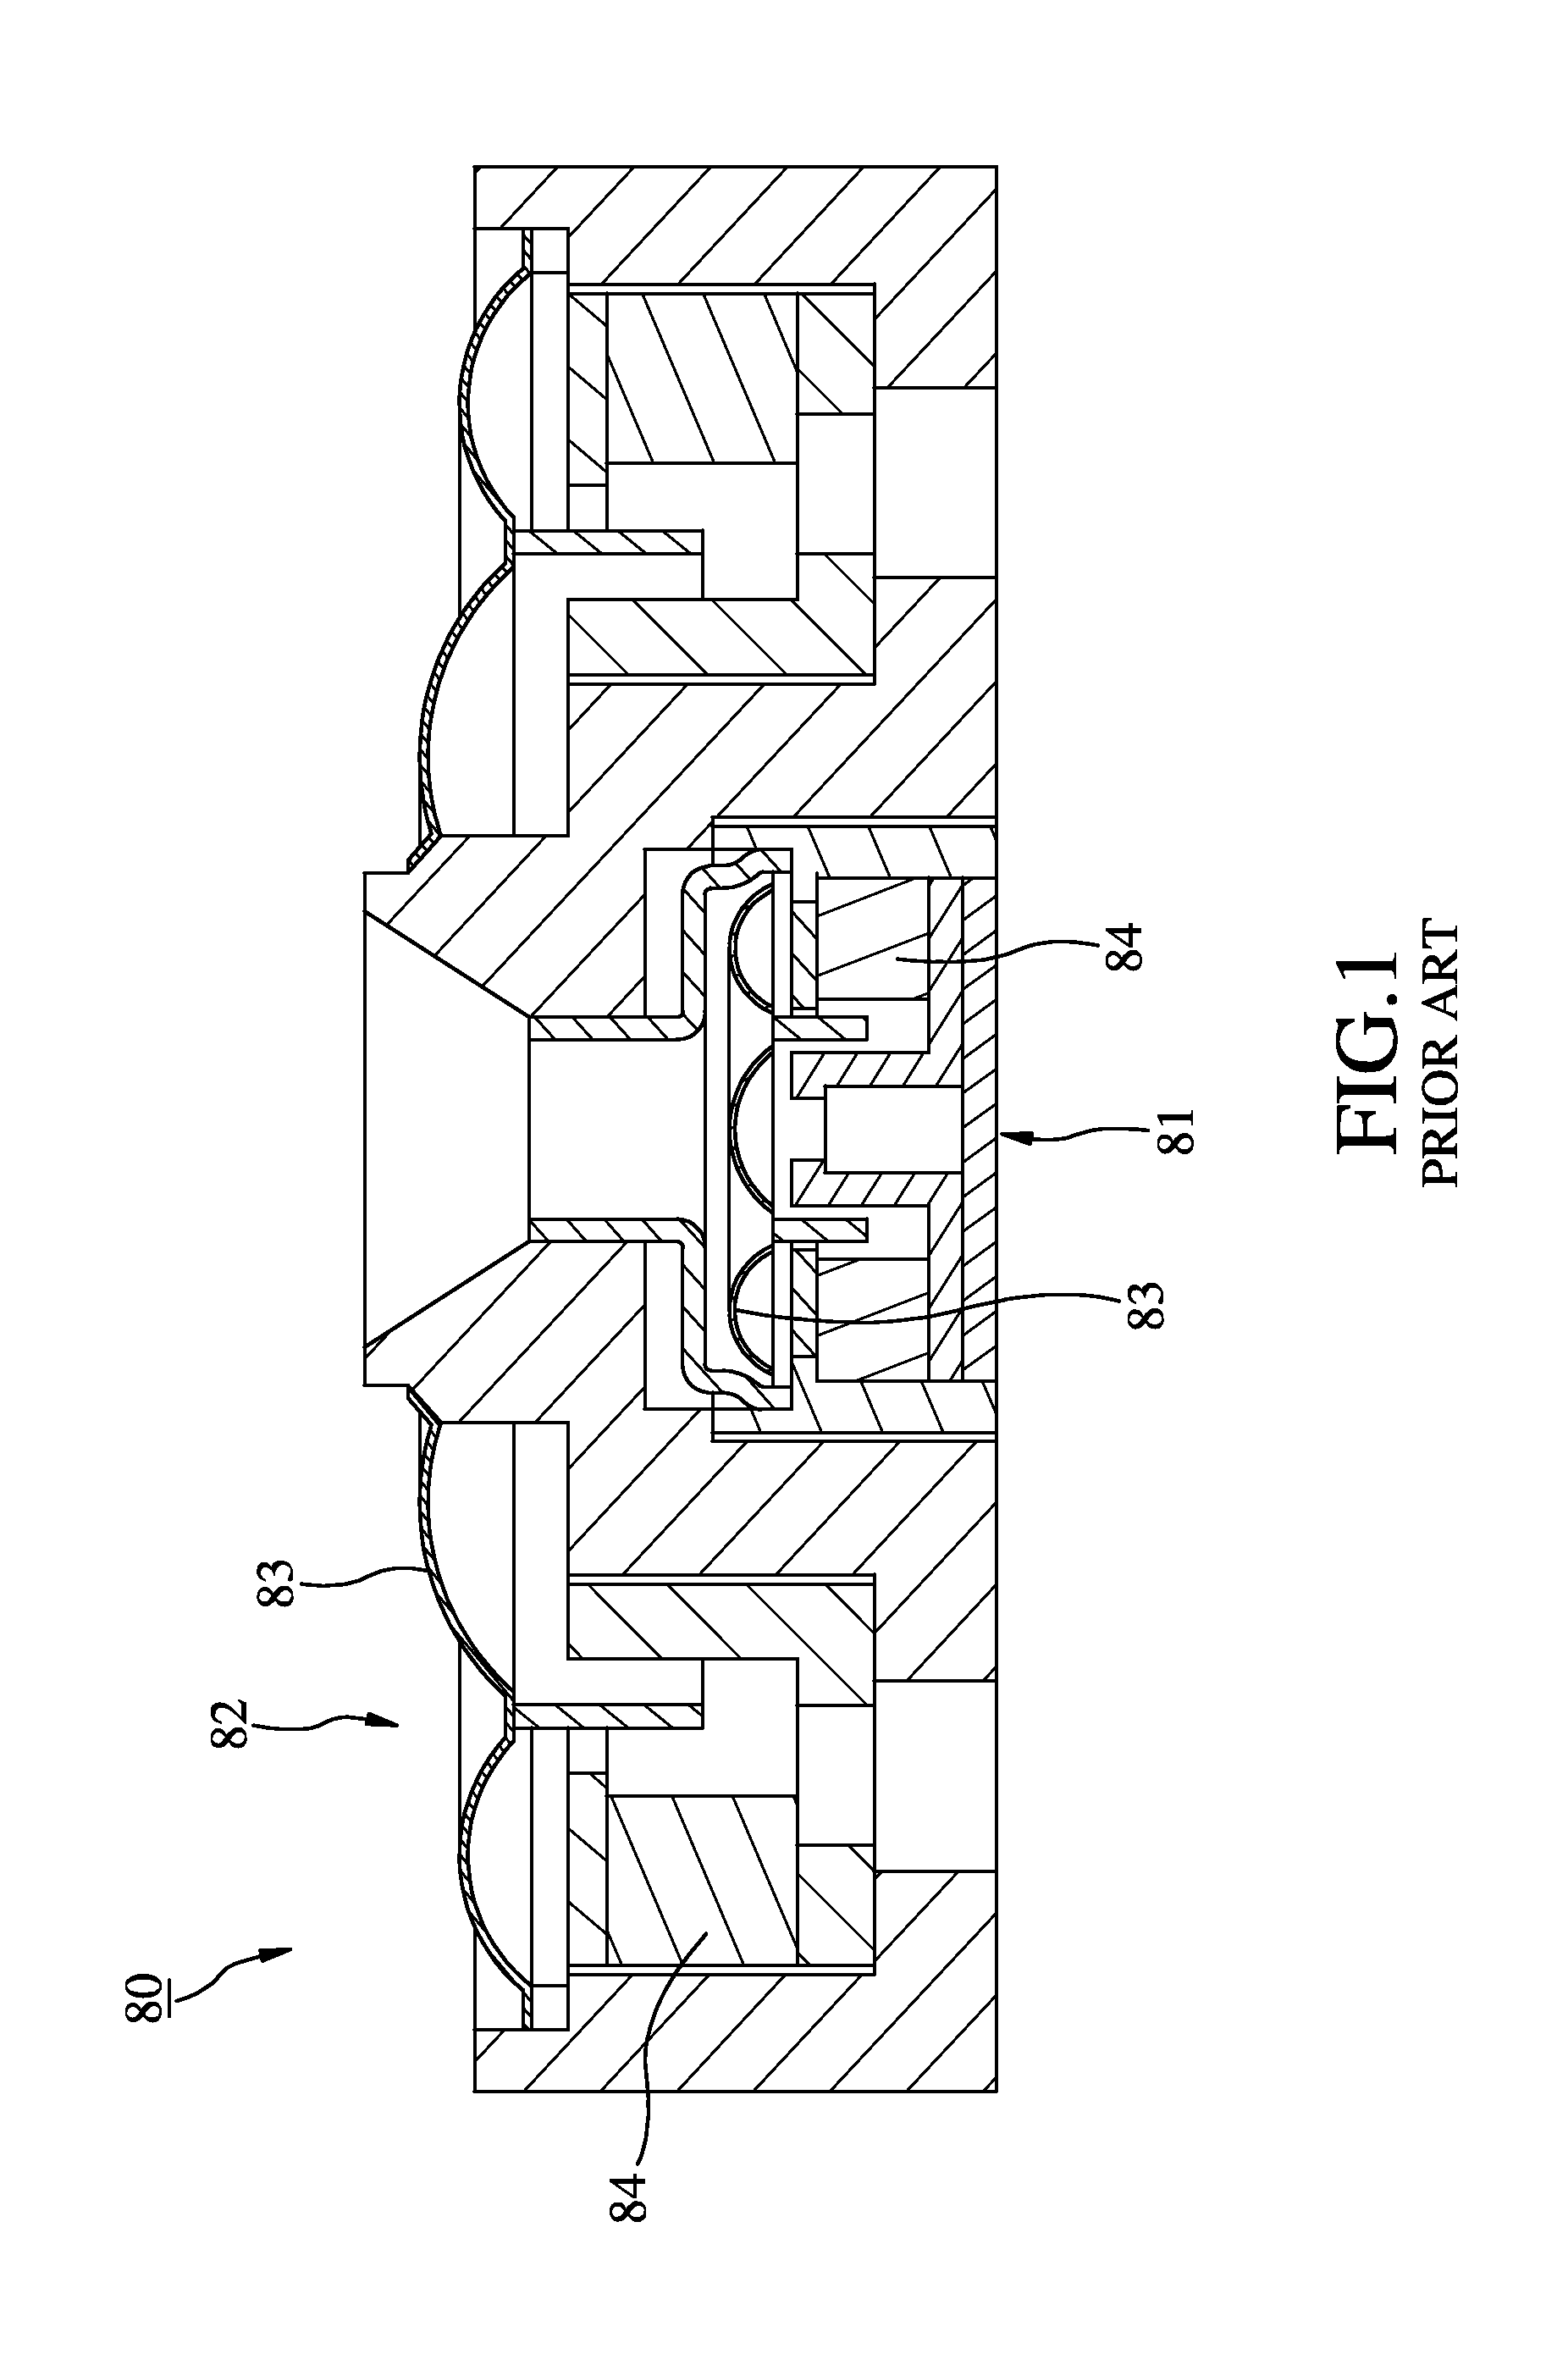 Magnetic circuit and coaxial speaker using the same